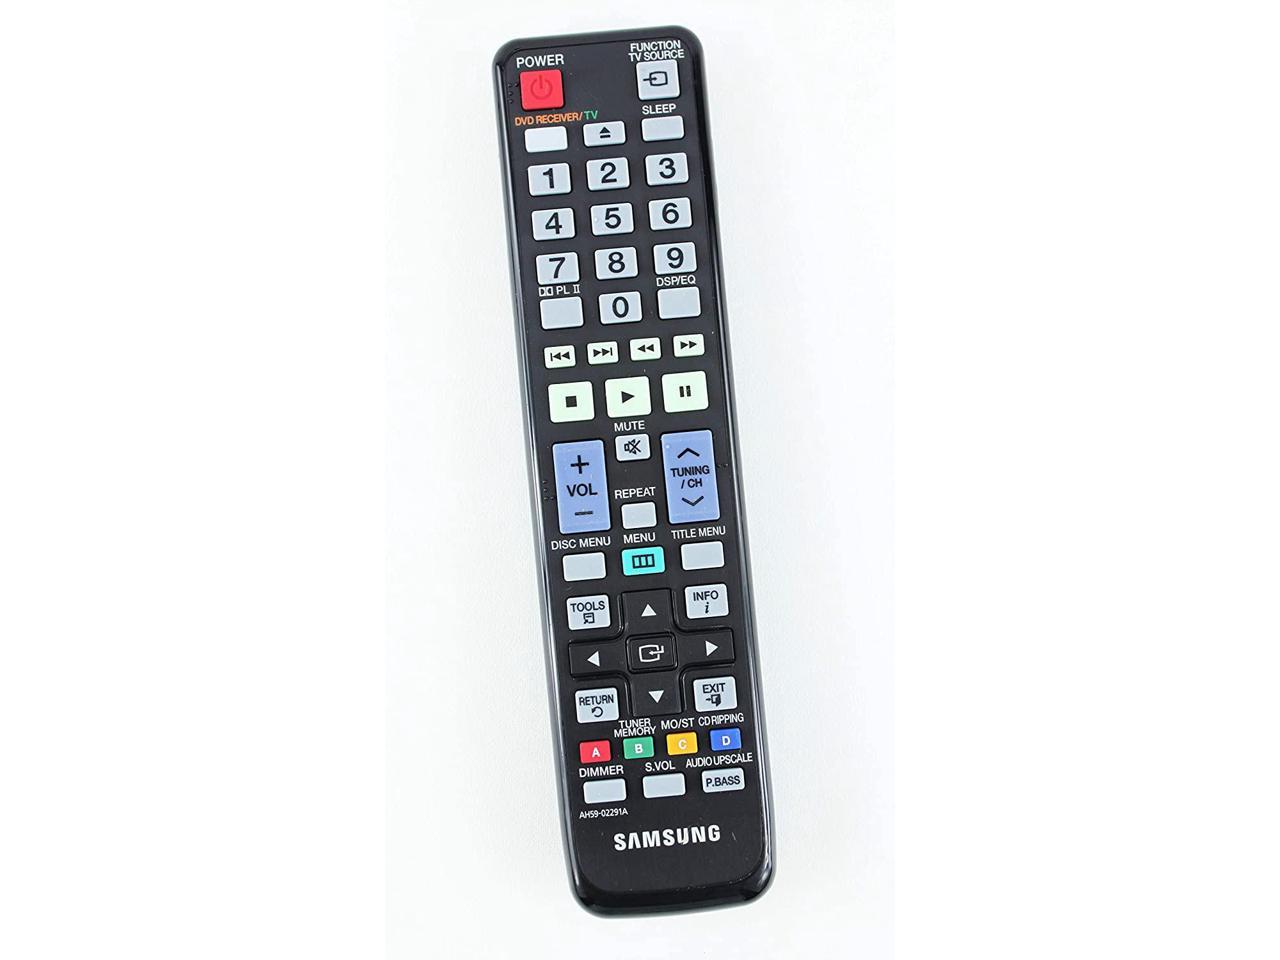 GA667WJSA LCD Remote Control Replaced for Sharp LC32D44 LC37M44L LC60LE6300UB LC32D47UT LC37SB24 Plasma HD LCD LED TV 